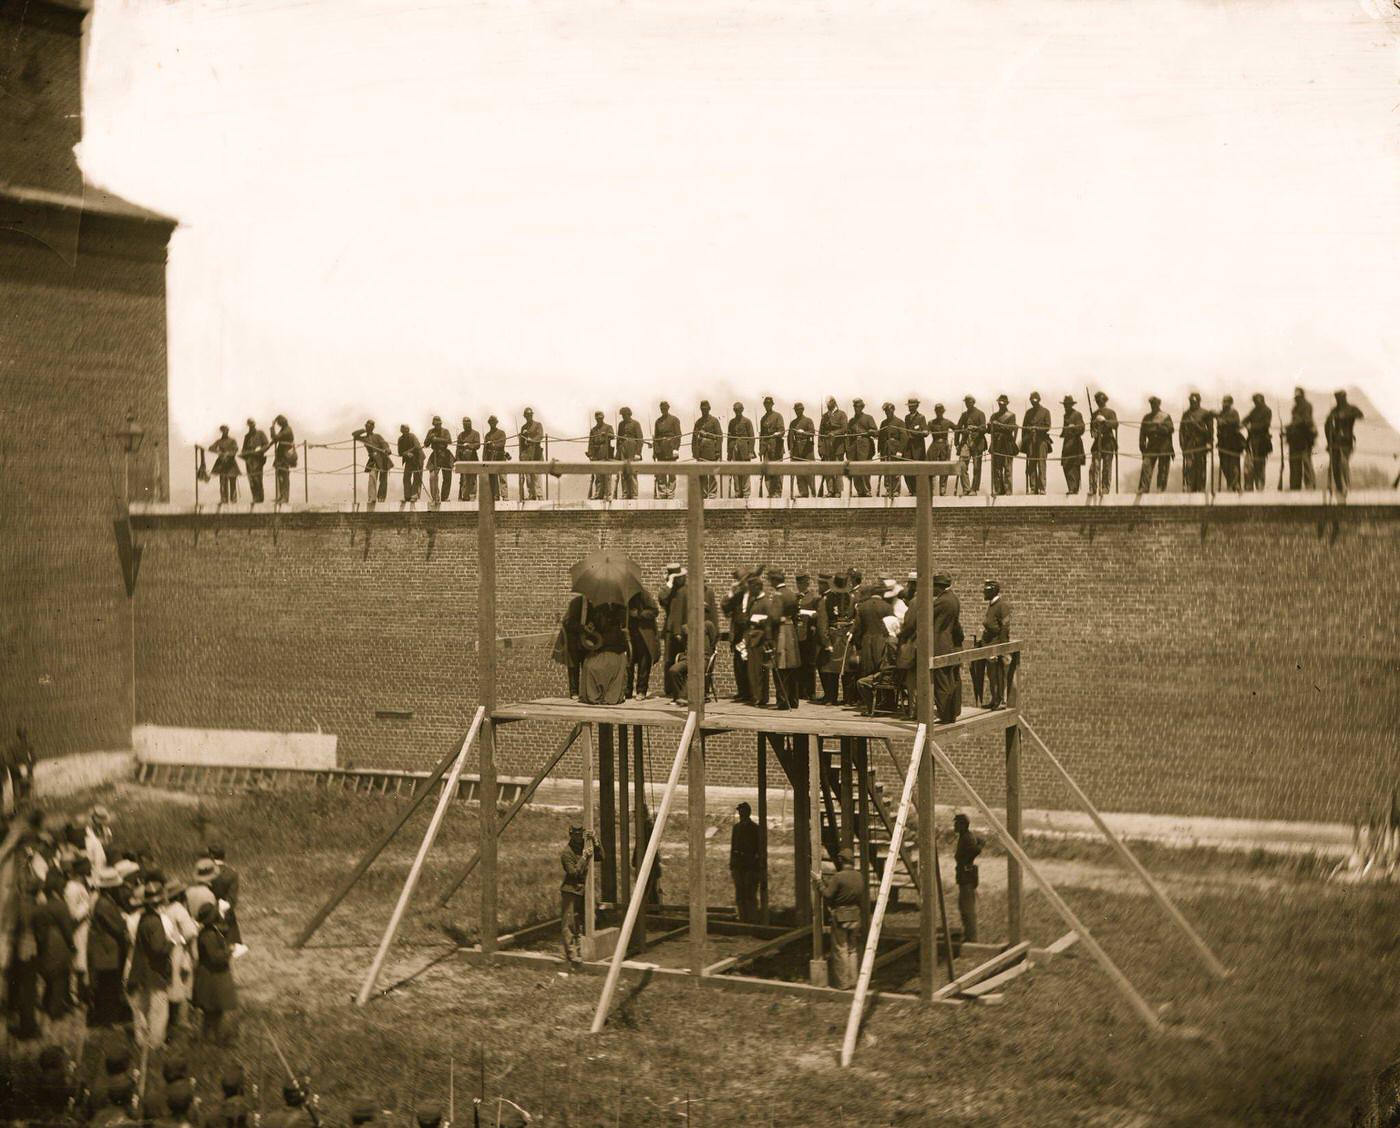 The four condemned conspirators (Mrs. Surratt, Payne, Herold, Atzerodt), with officers and others on the scaffold; guards on the wall, Washington, D.C., 1865